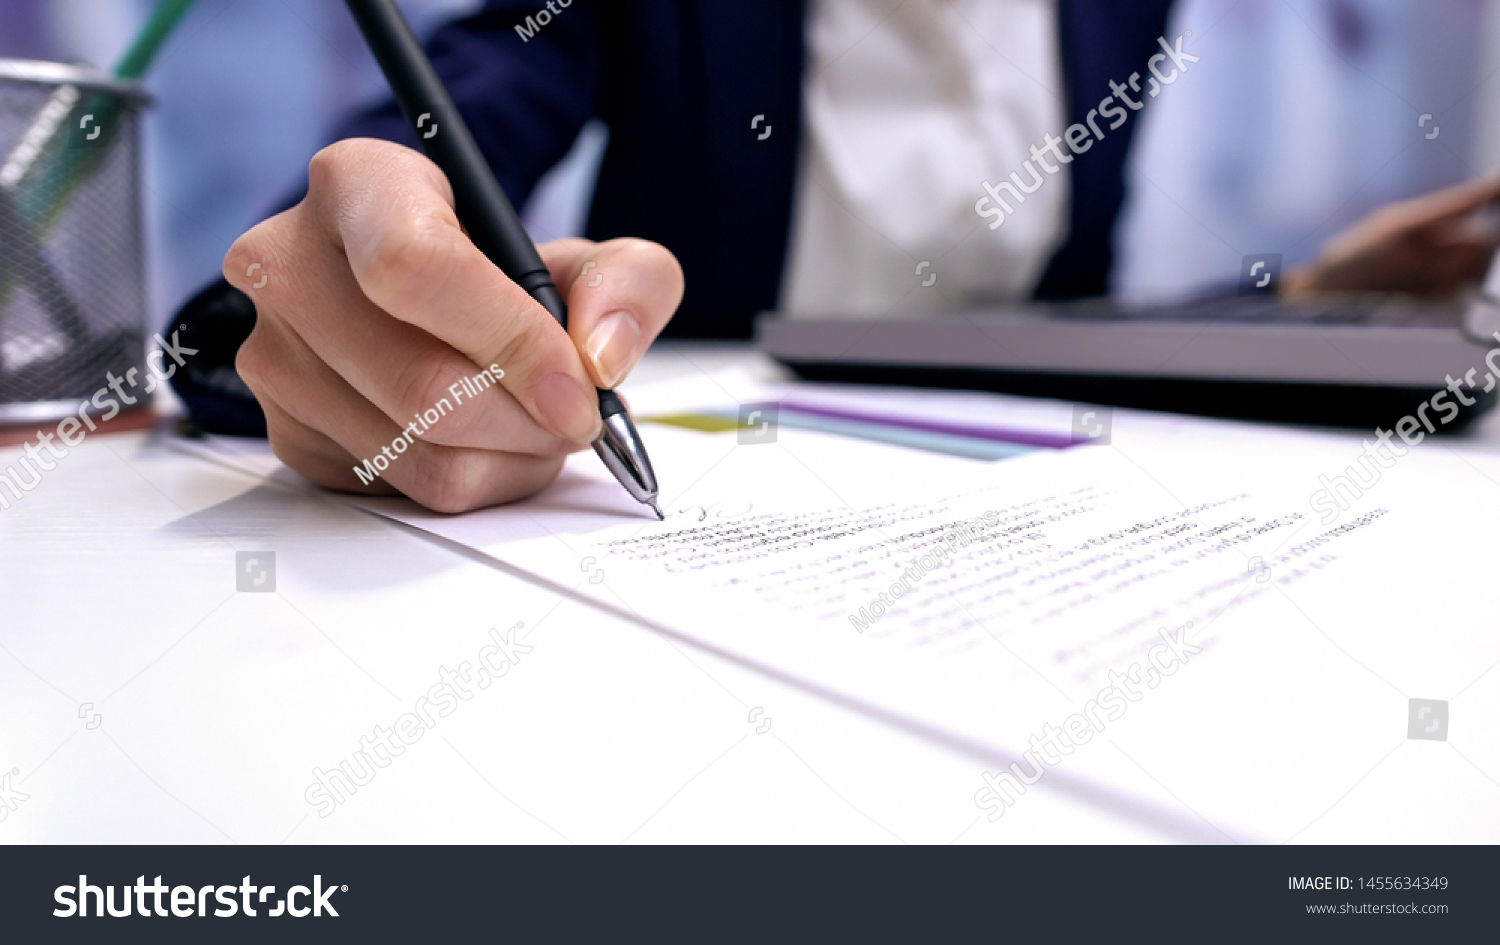 Female director signing document on office table, company agreement, business #1455634349